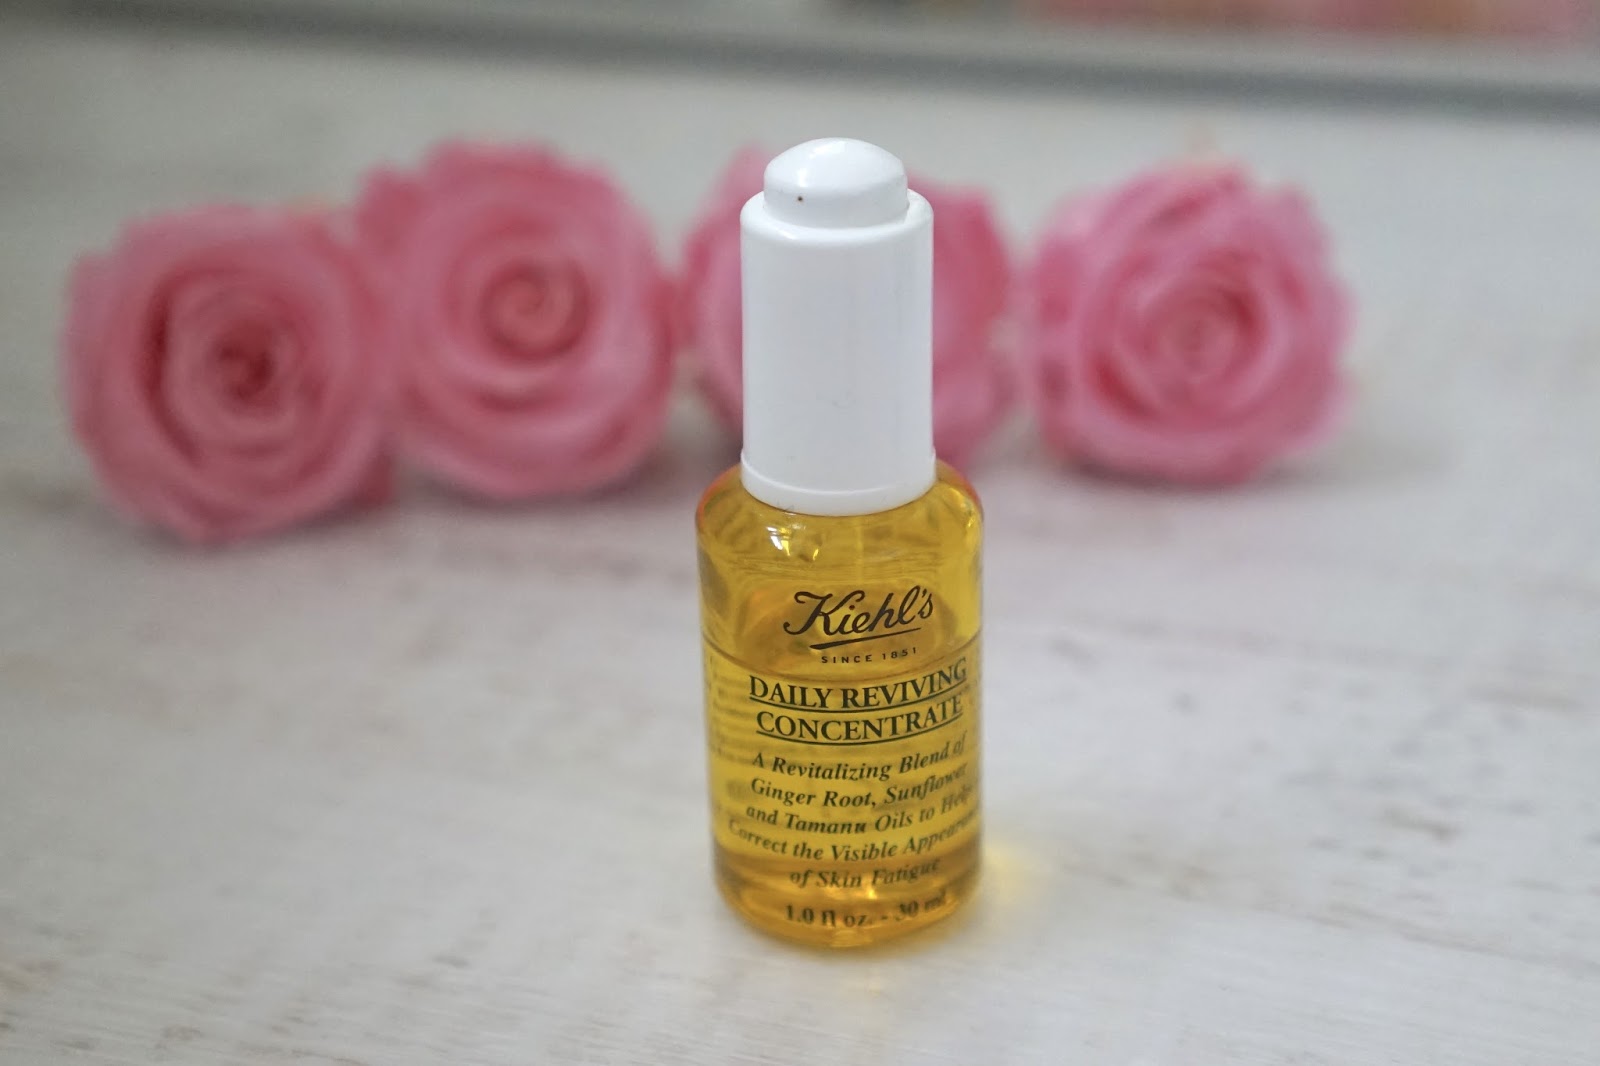 kiehl's daily reviving concentrate